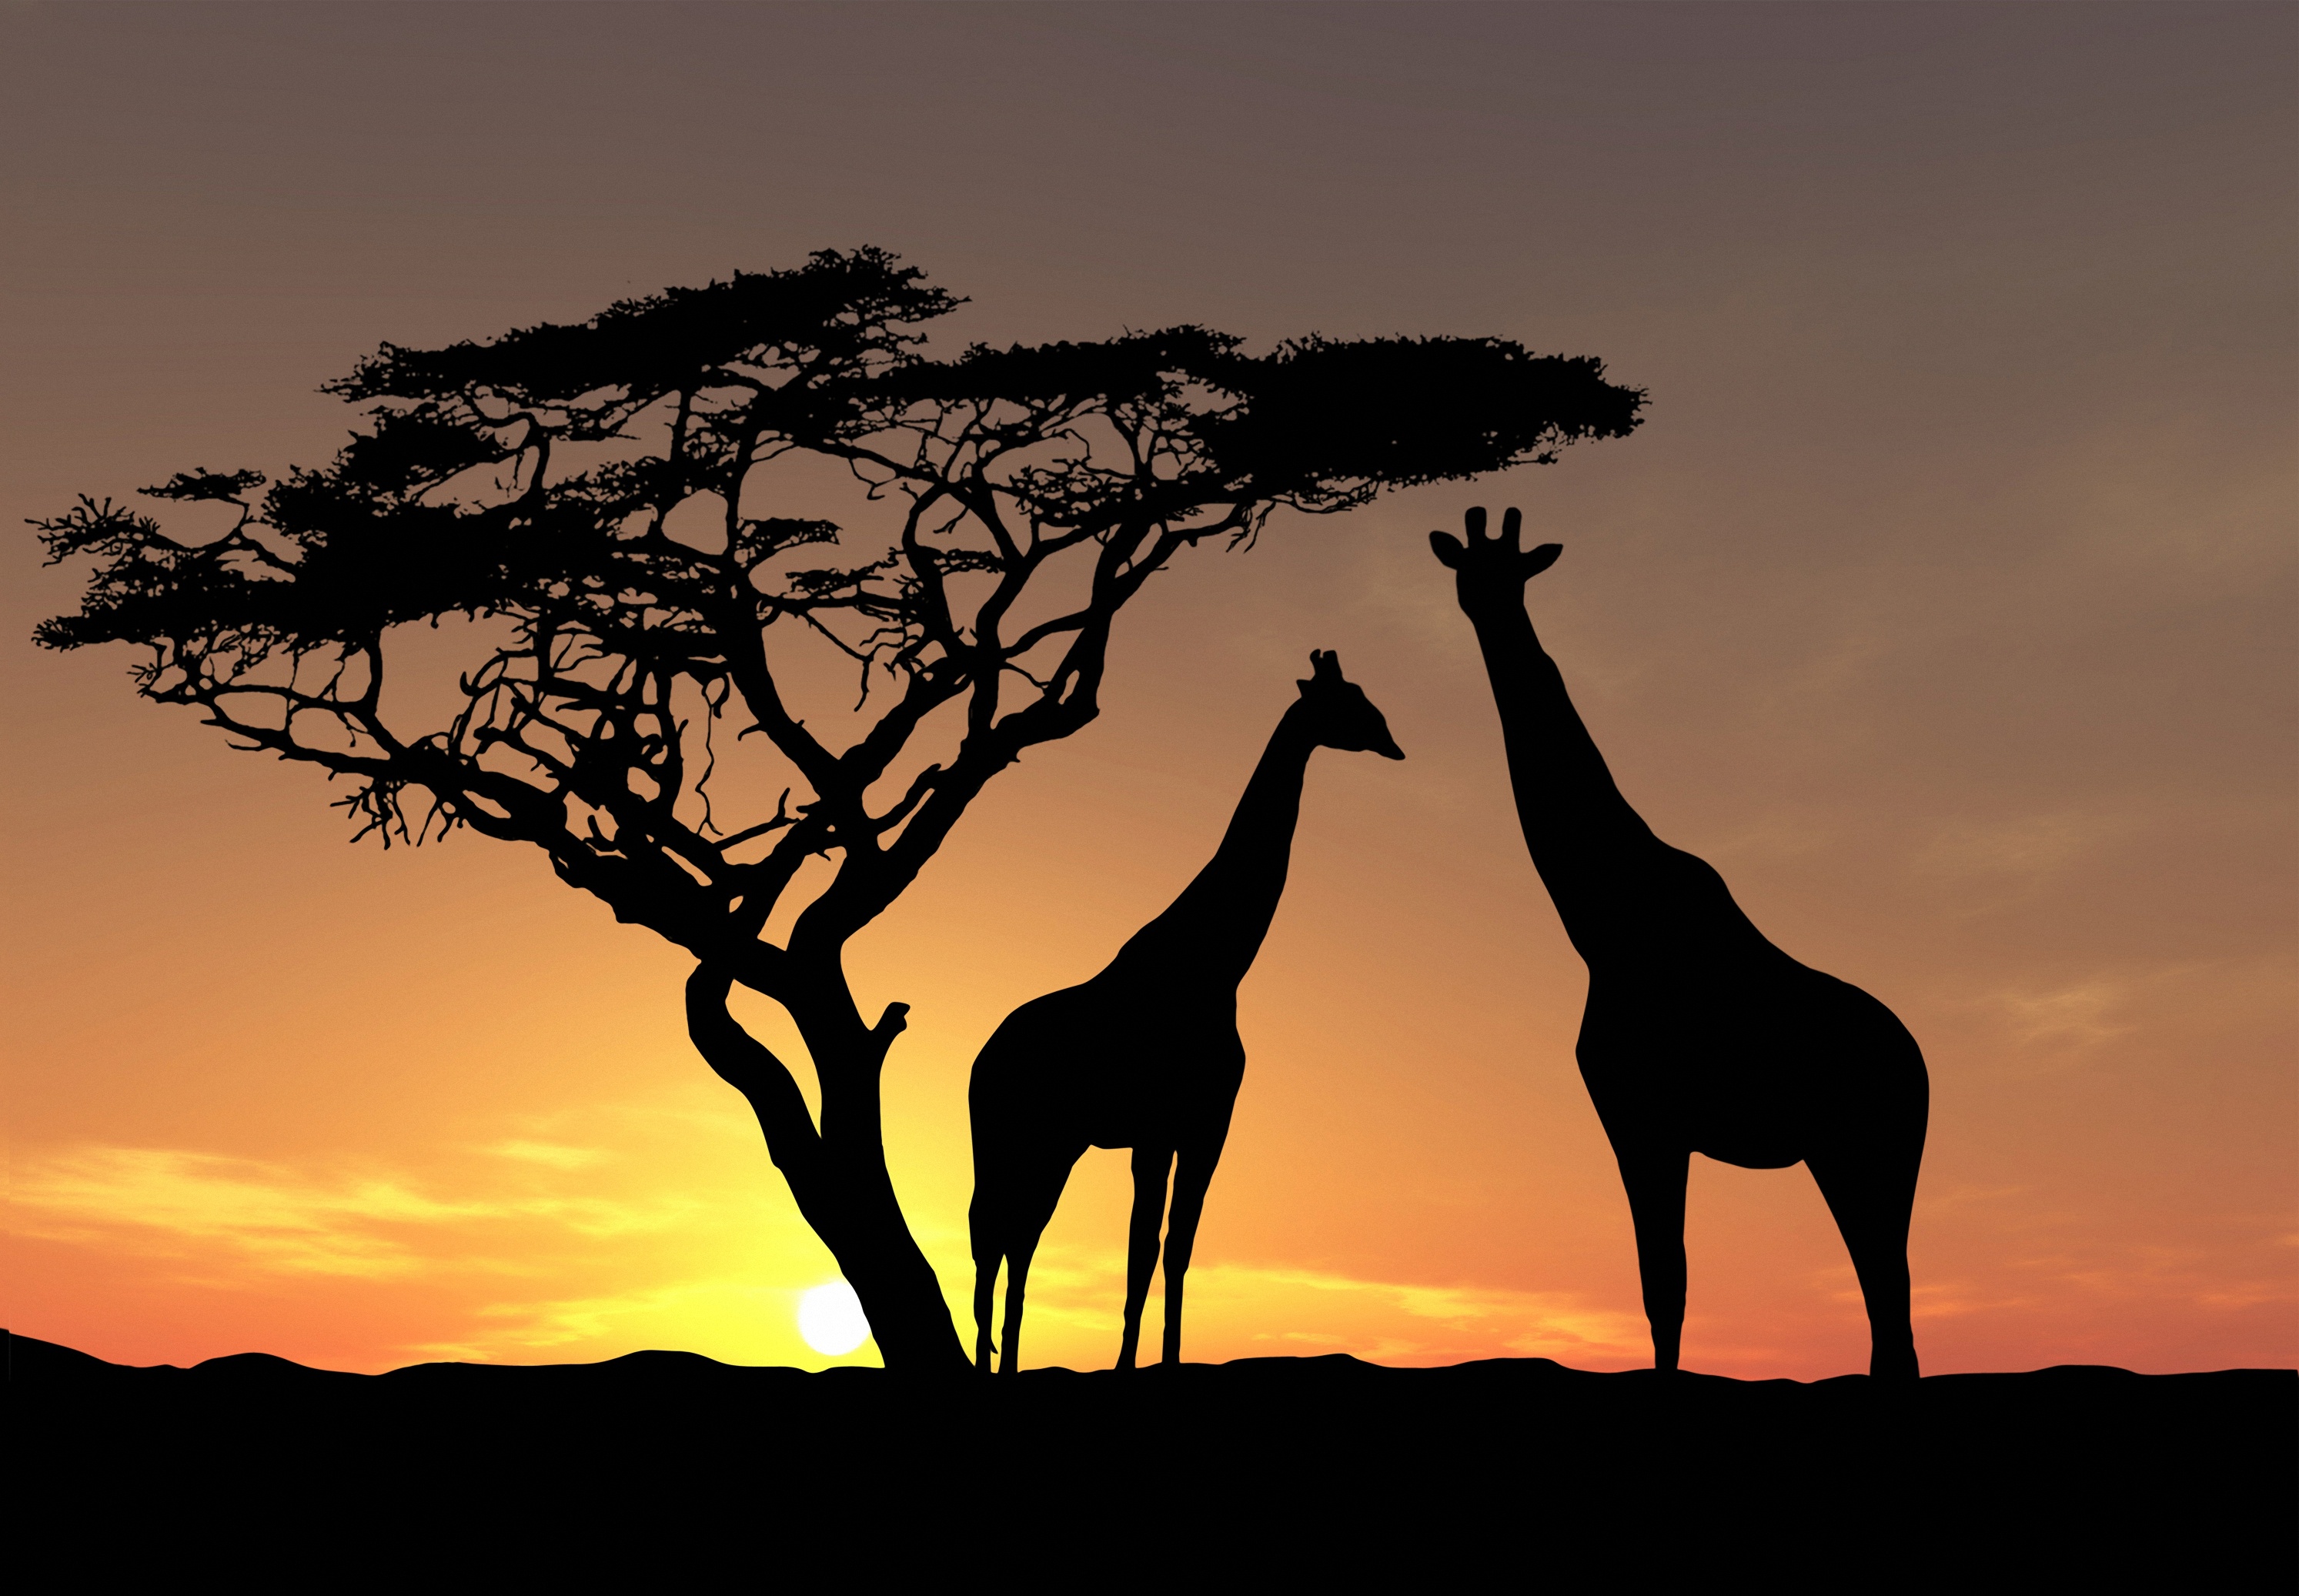 Giraffe HD wallpapers, Majestic African wildlife, Nature's beauty, Captivating images, 2990x2080 HD Desktop